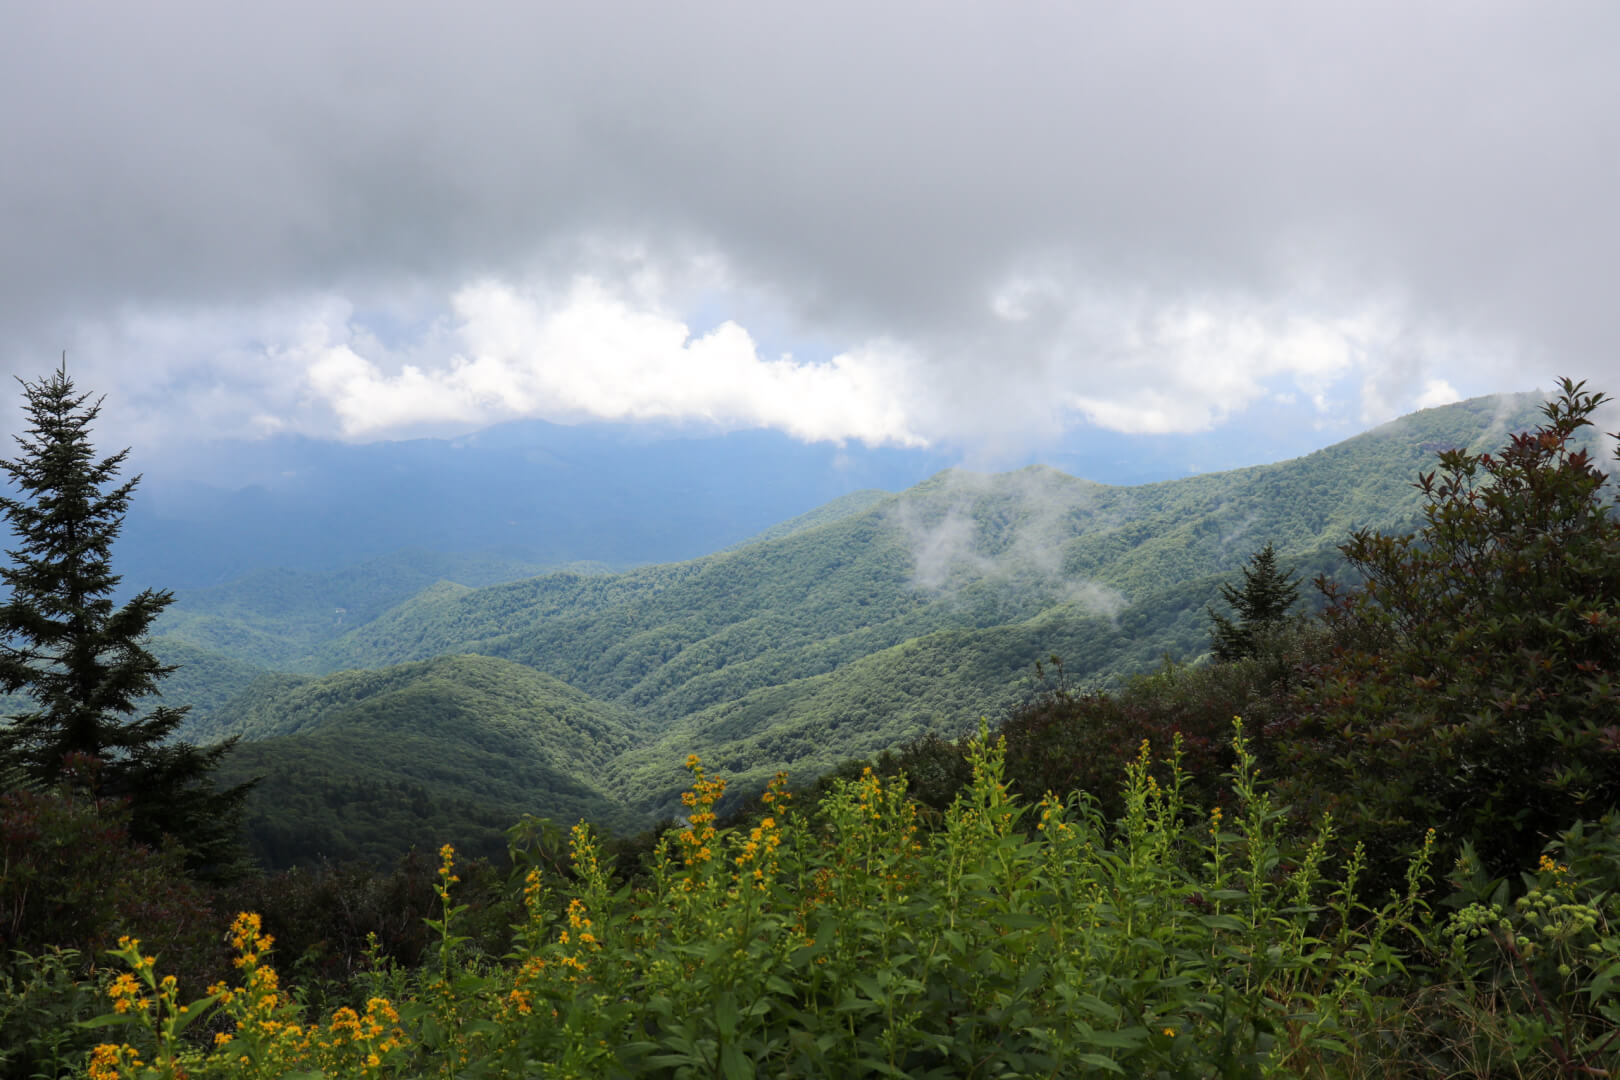 Why You Need to Stop at Waterrock Knob on the Blue Ridge Parkway